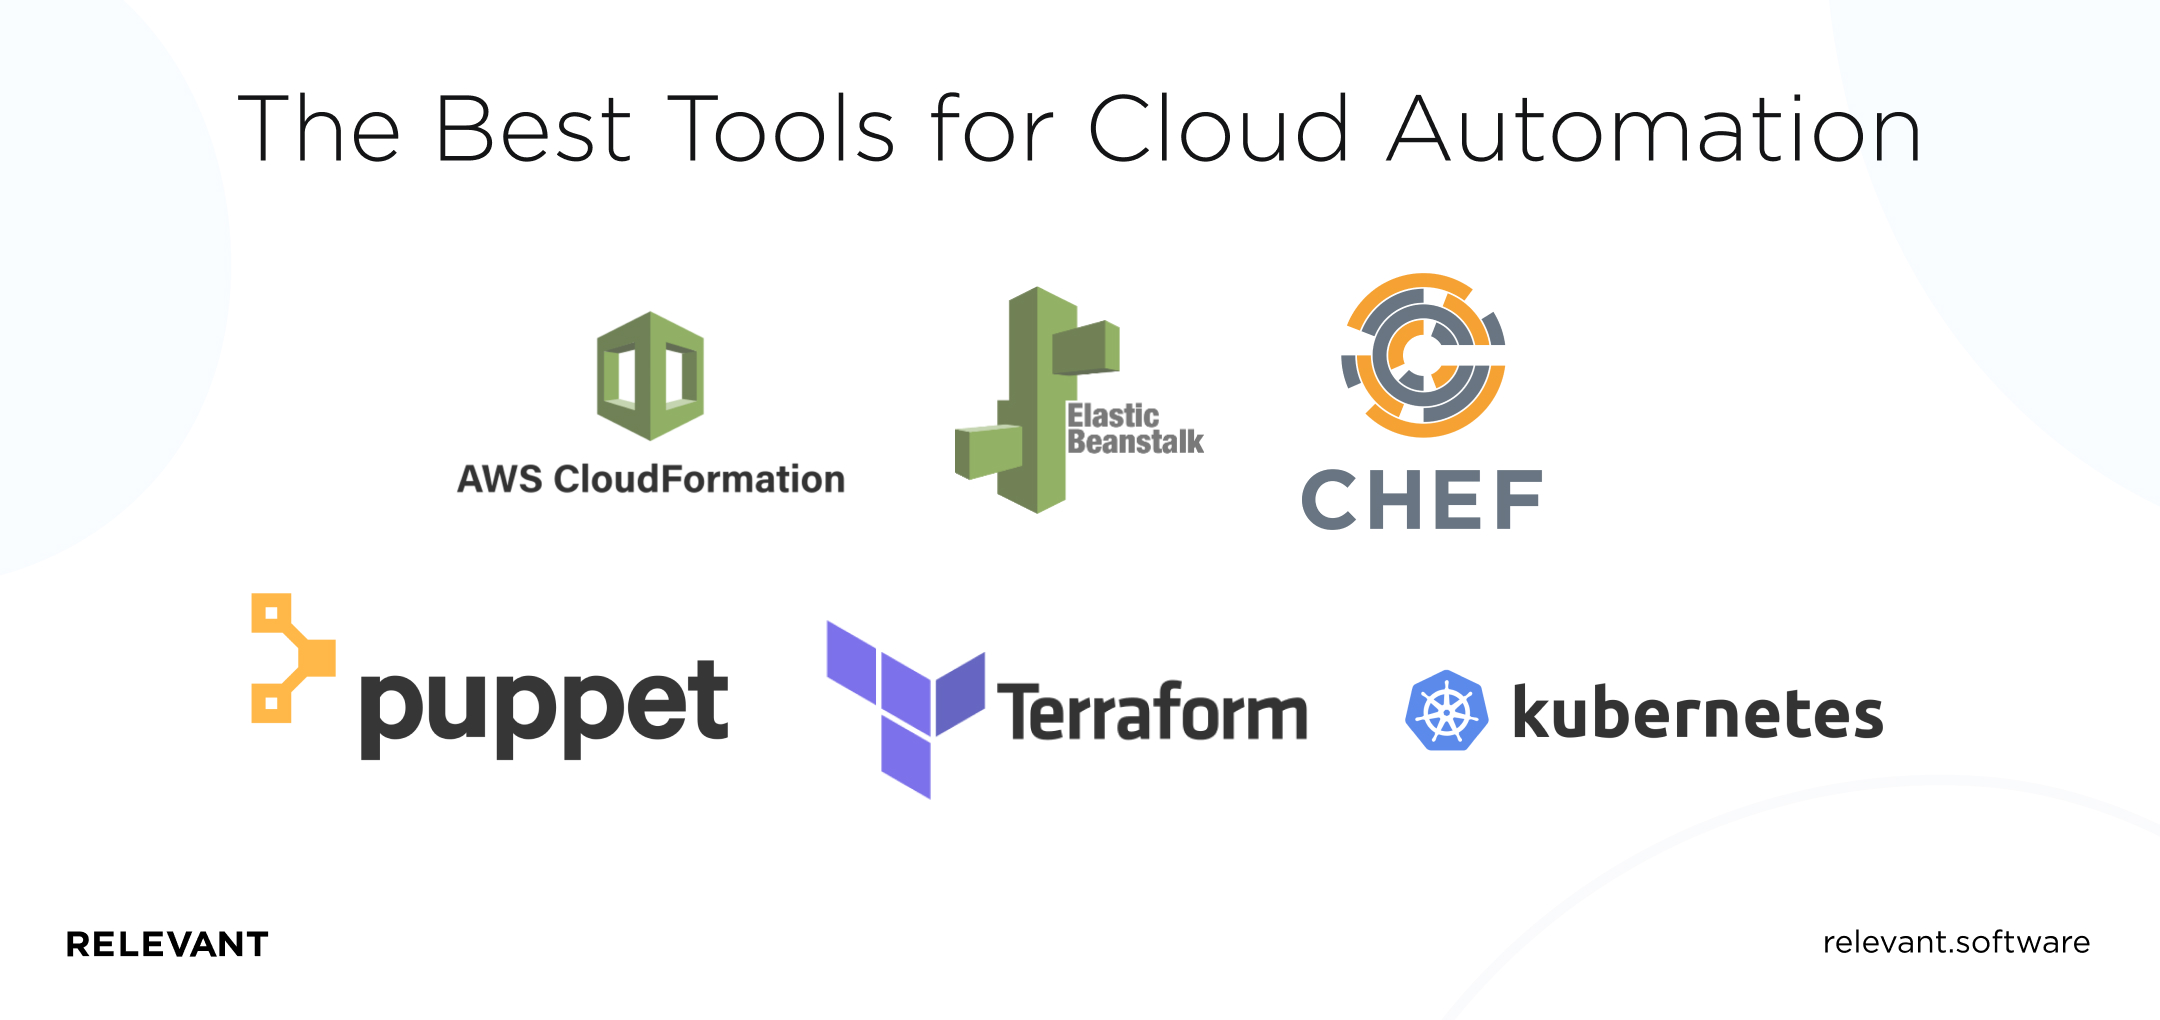 The Best Tools for Cloud Automation